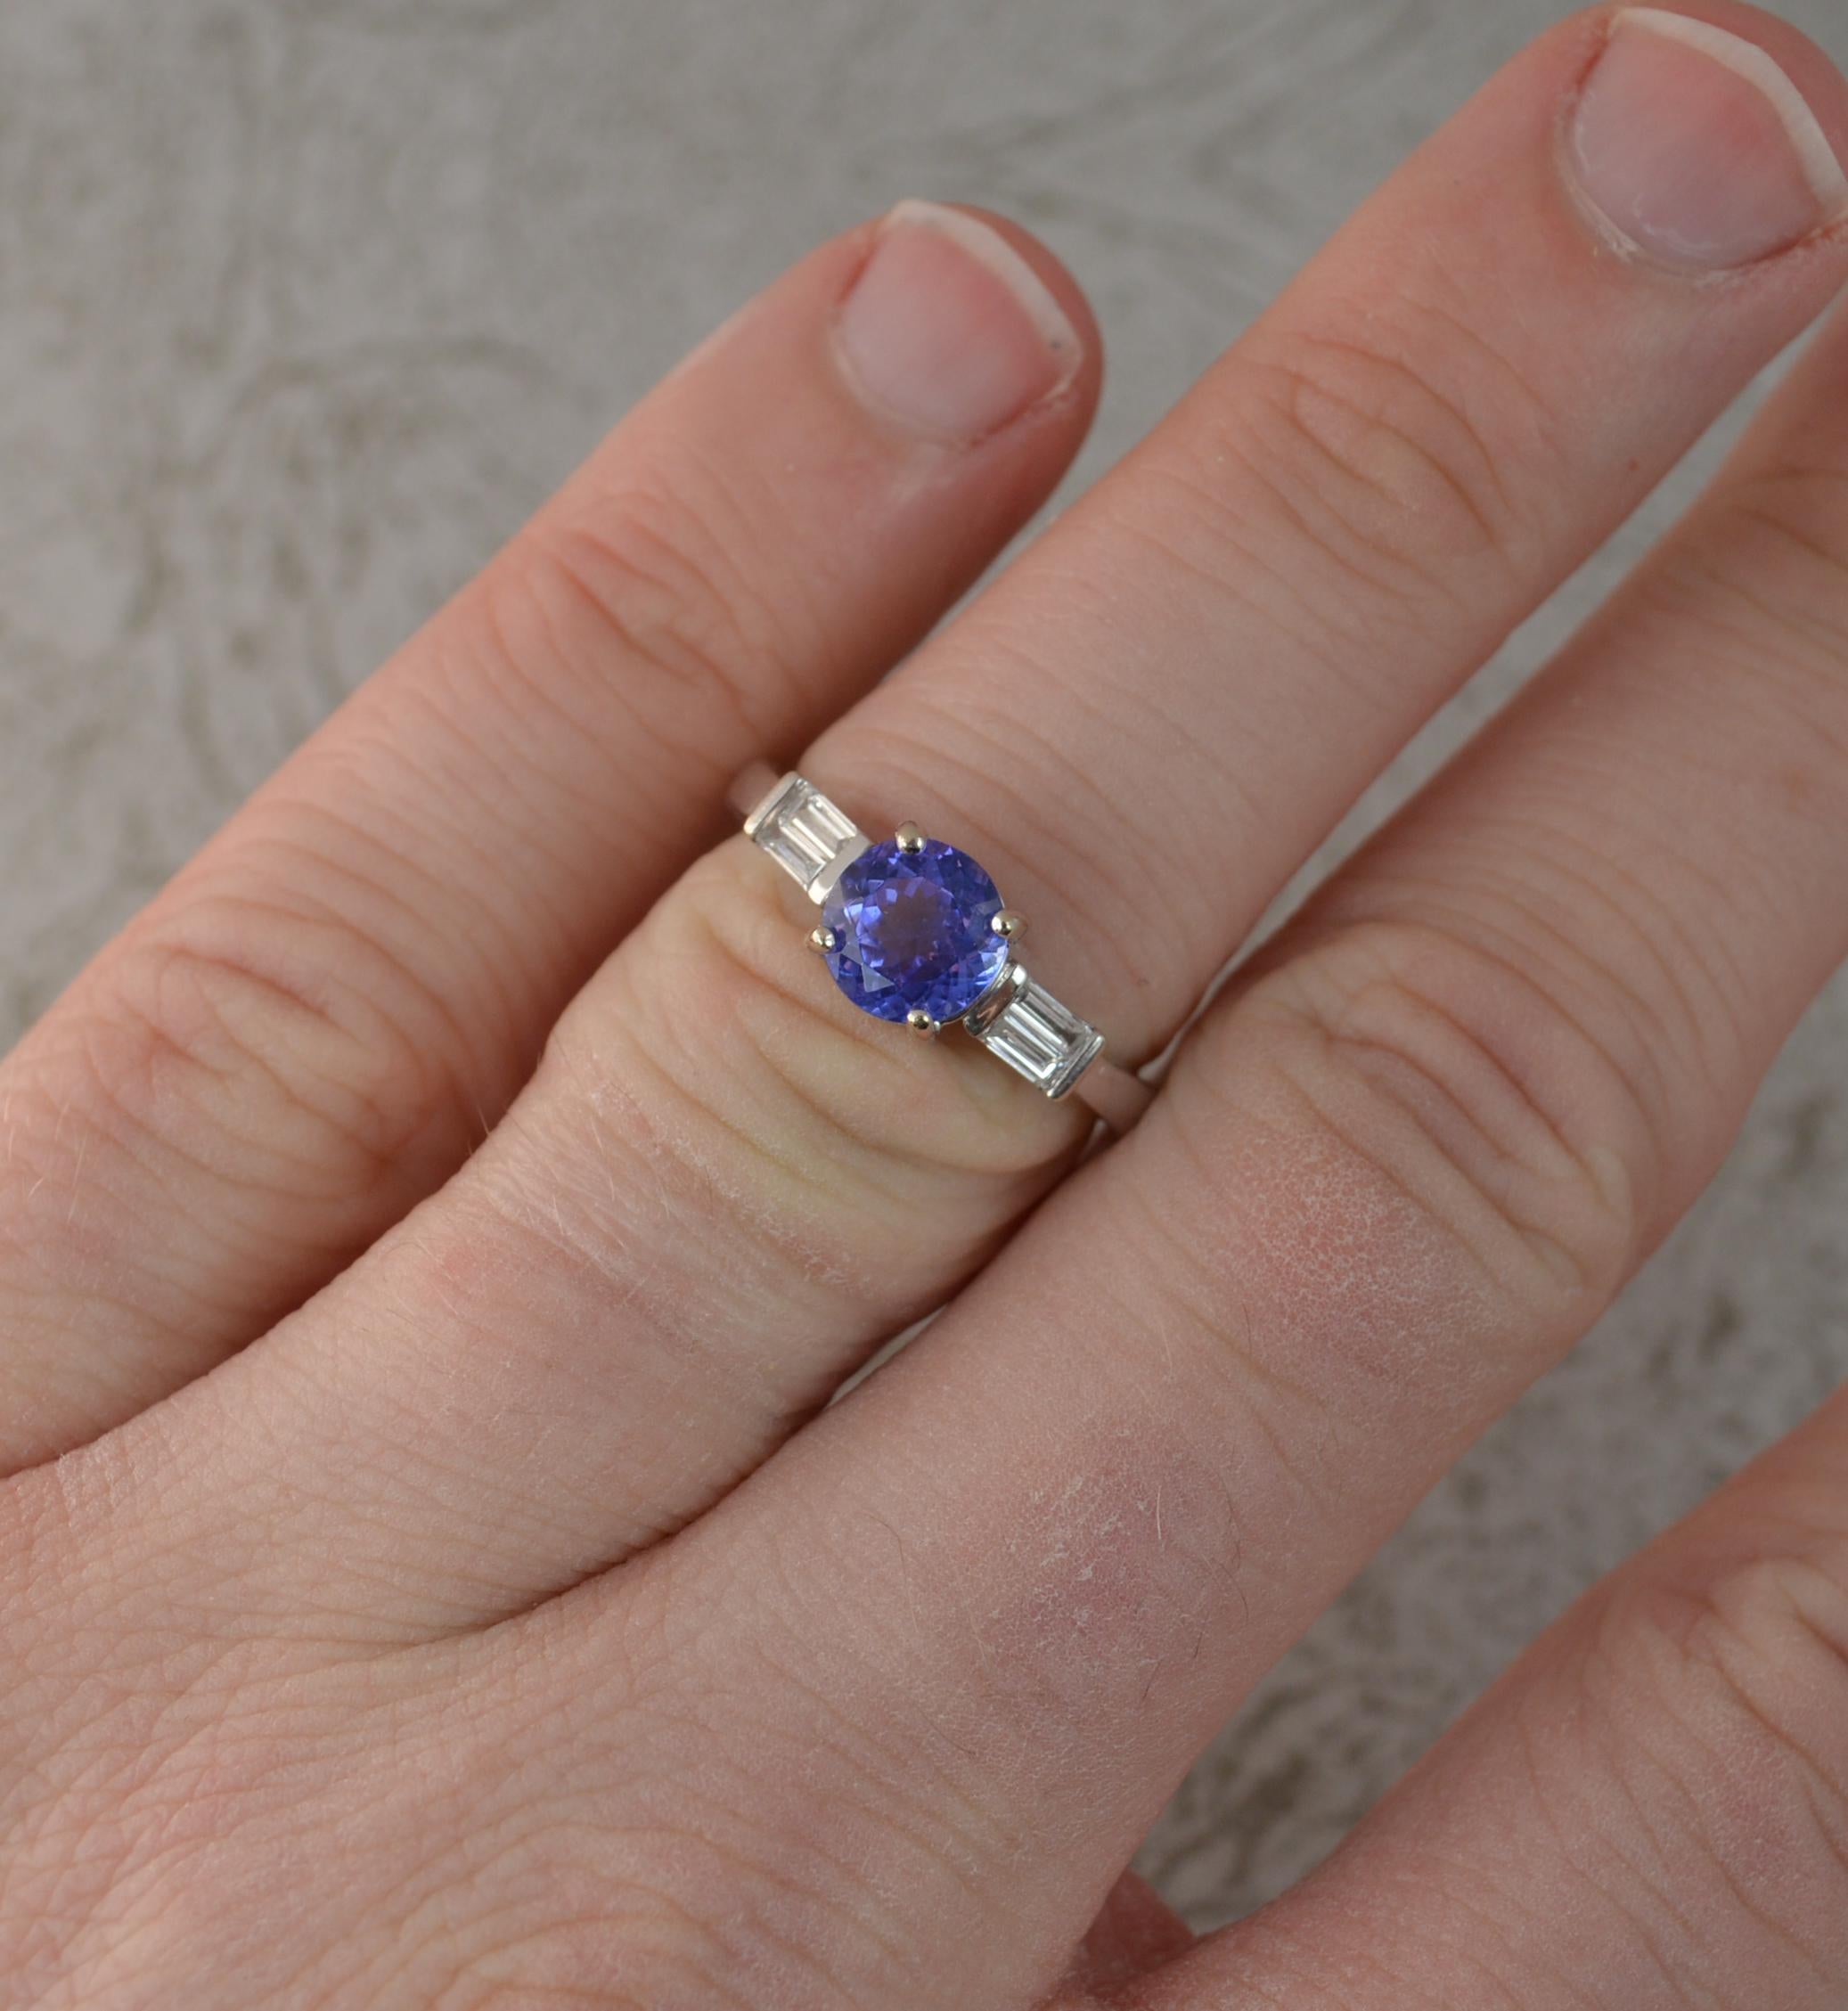 A wonderful engagement type ring.
Solid 18 carat white gold example.
Set with a round cut tanzanite to centre, 6.4mm diameter, with intense colour.
To each side are two vs clarity baguette cut diamonds. 0.30 carats total.
Protruding 5.7mm off the